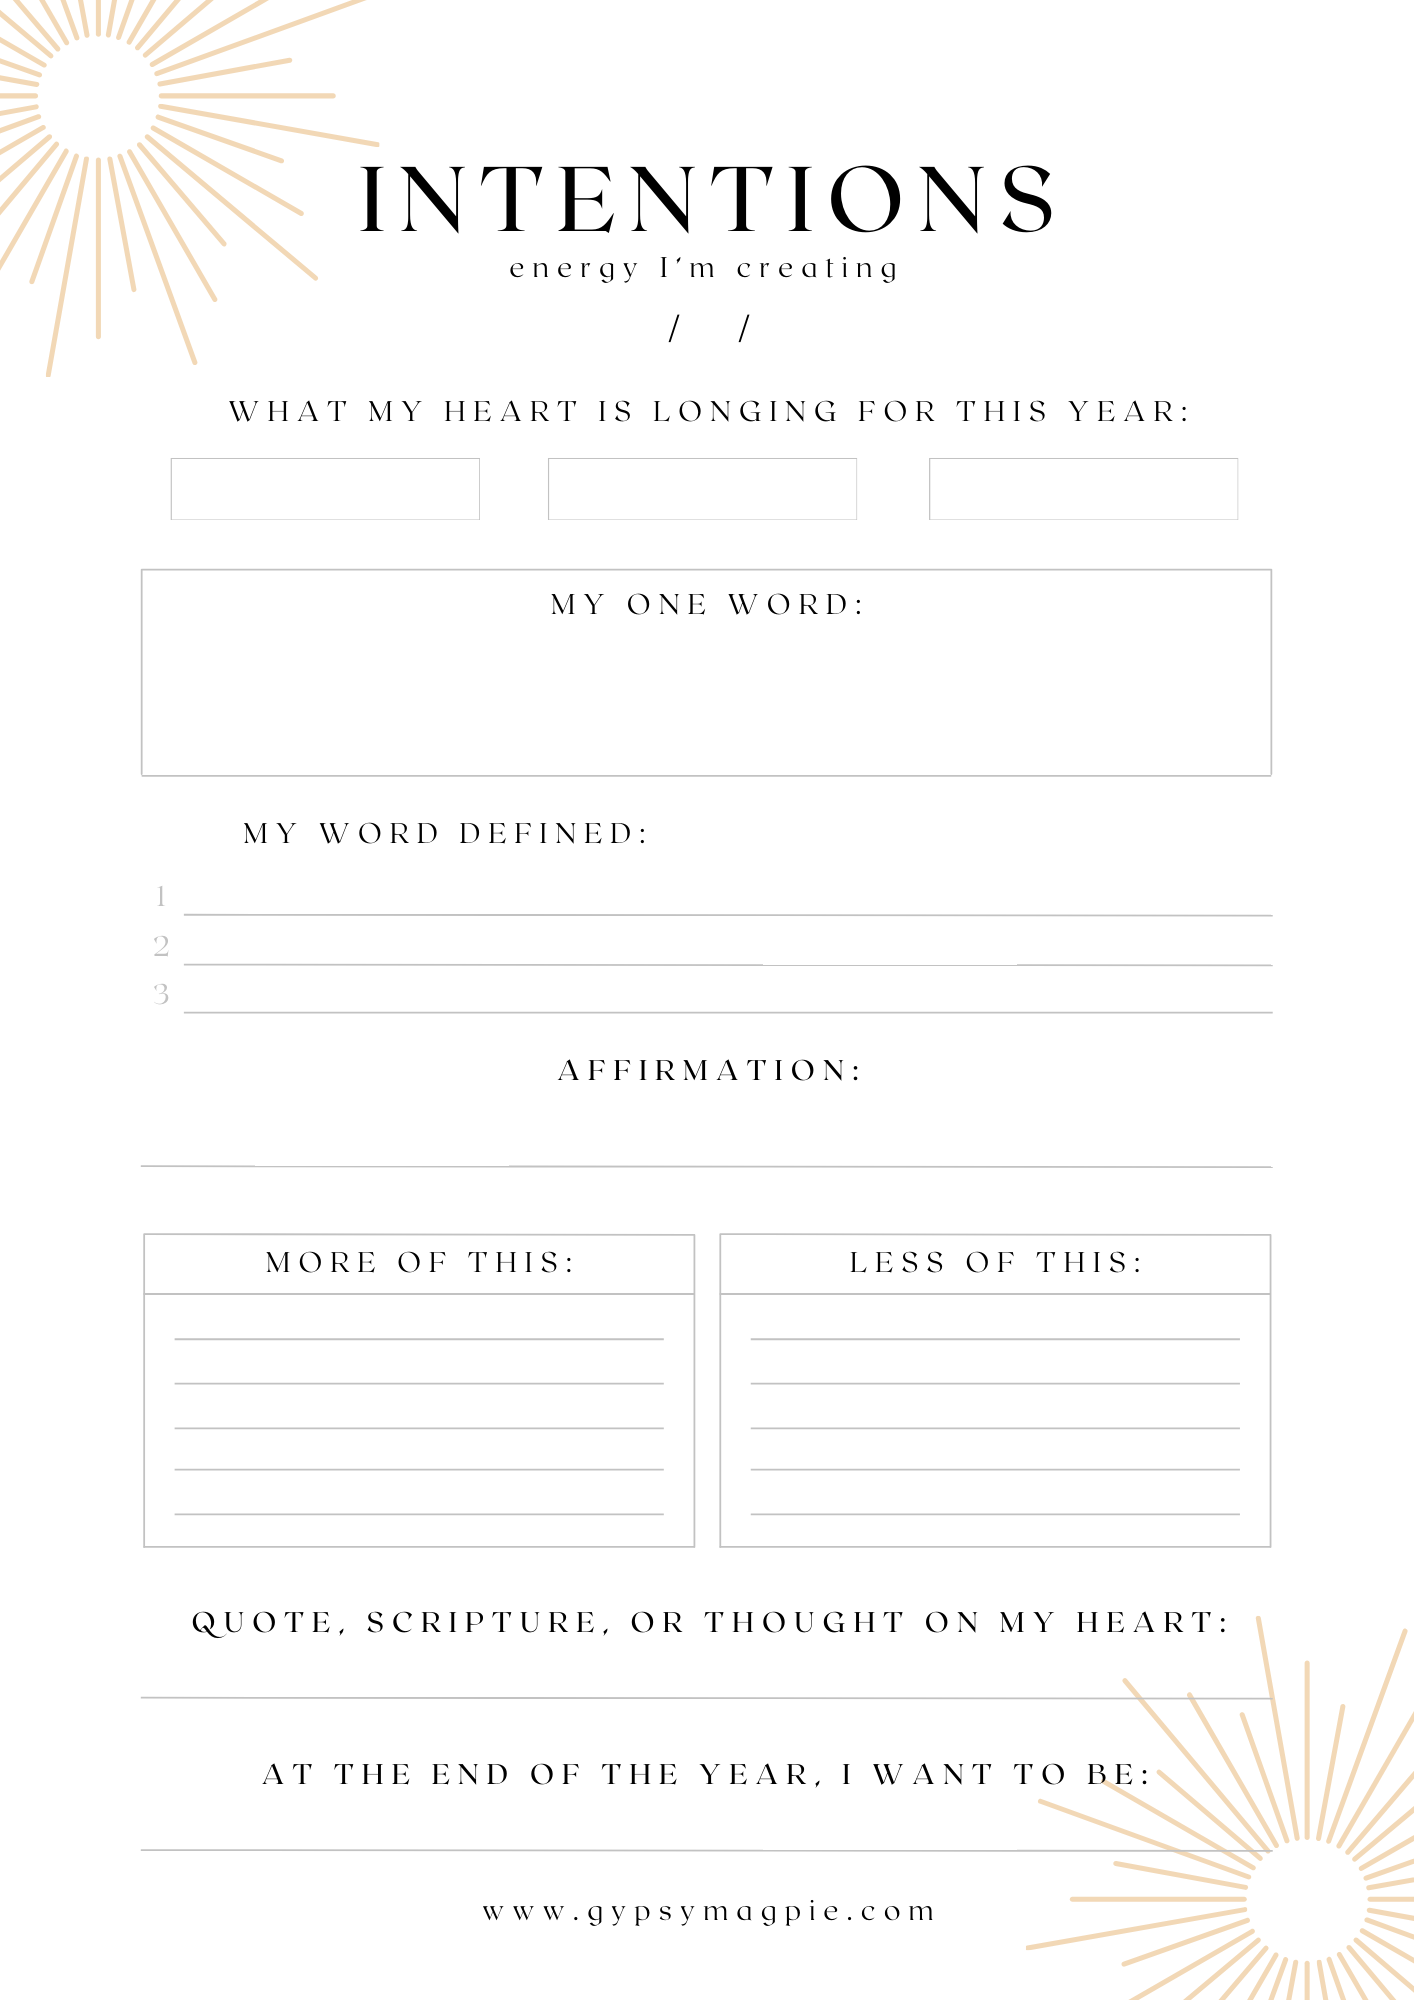 Setting and journaling New Year Intentions. See the link in post for 3 page free printable!